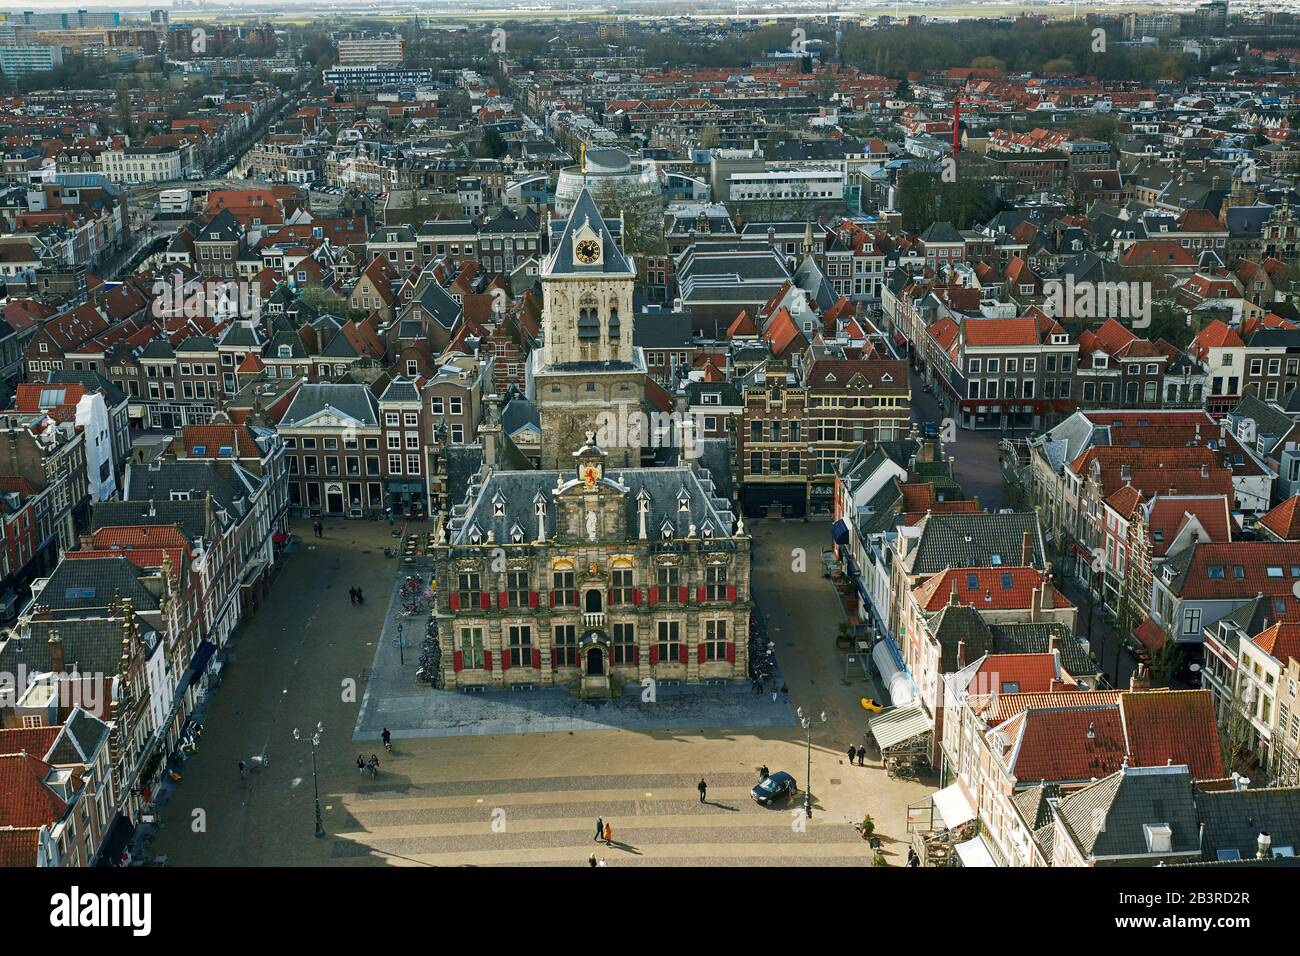 Elevated view of the renaissance Town Hall in the historic market town of Delft, Holland Stock Photo